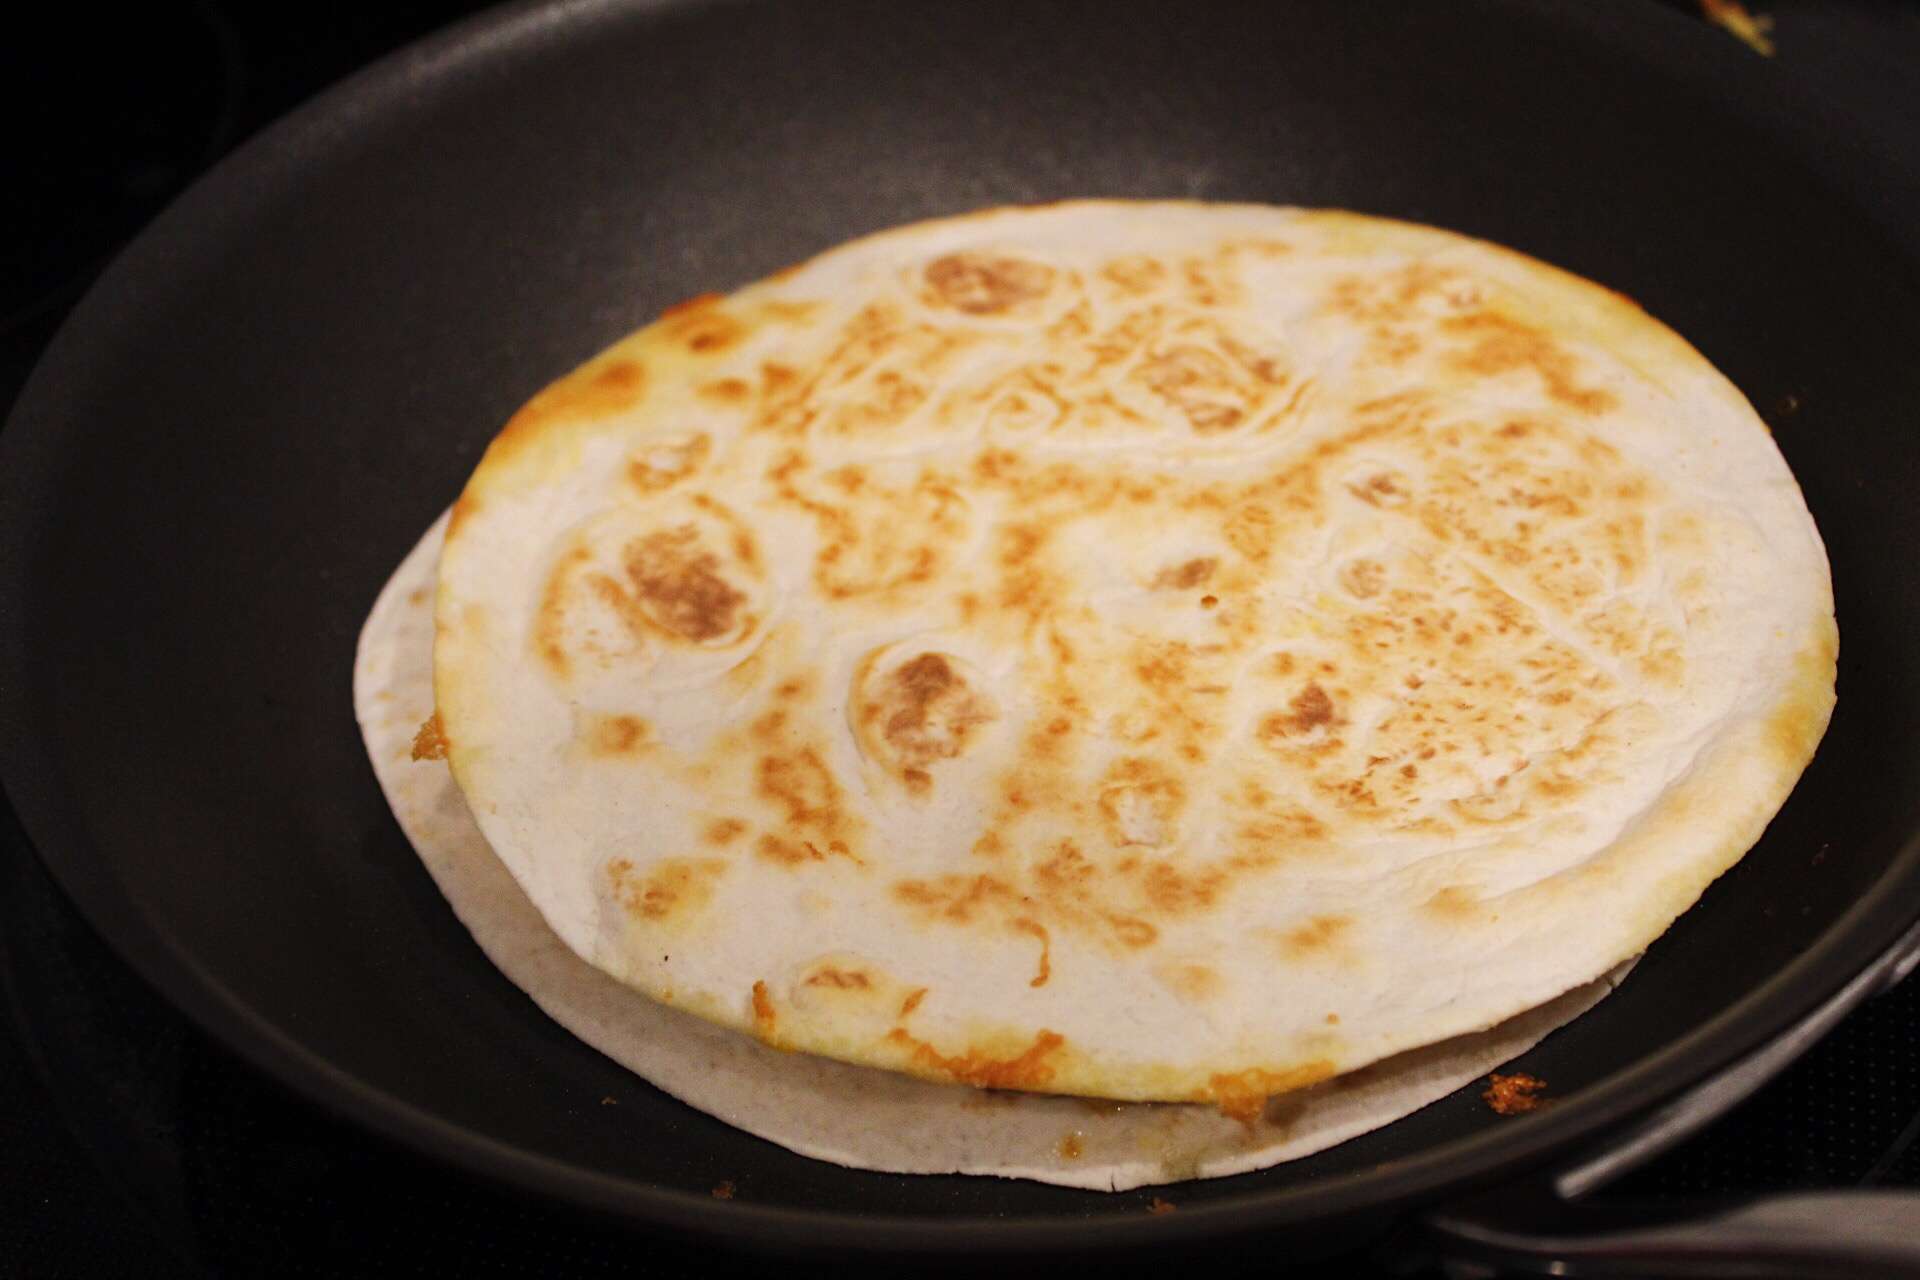 Chicken quesadilla cooking in skillet on stove top.